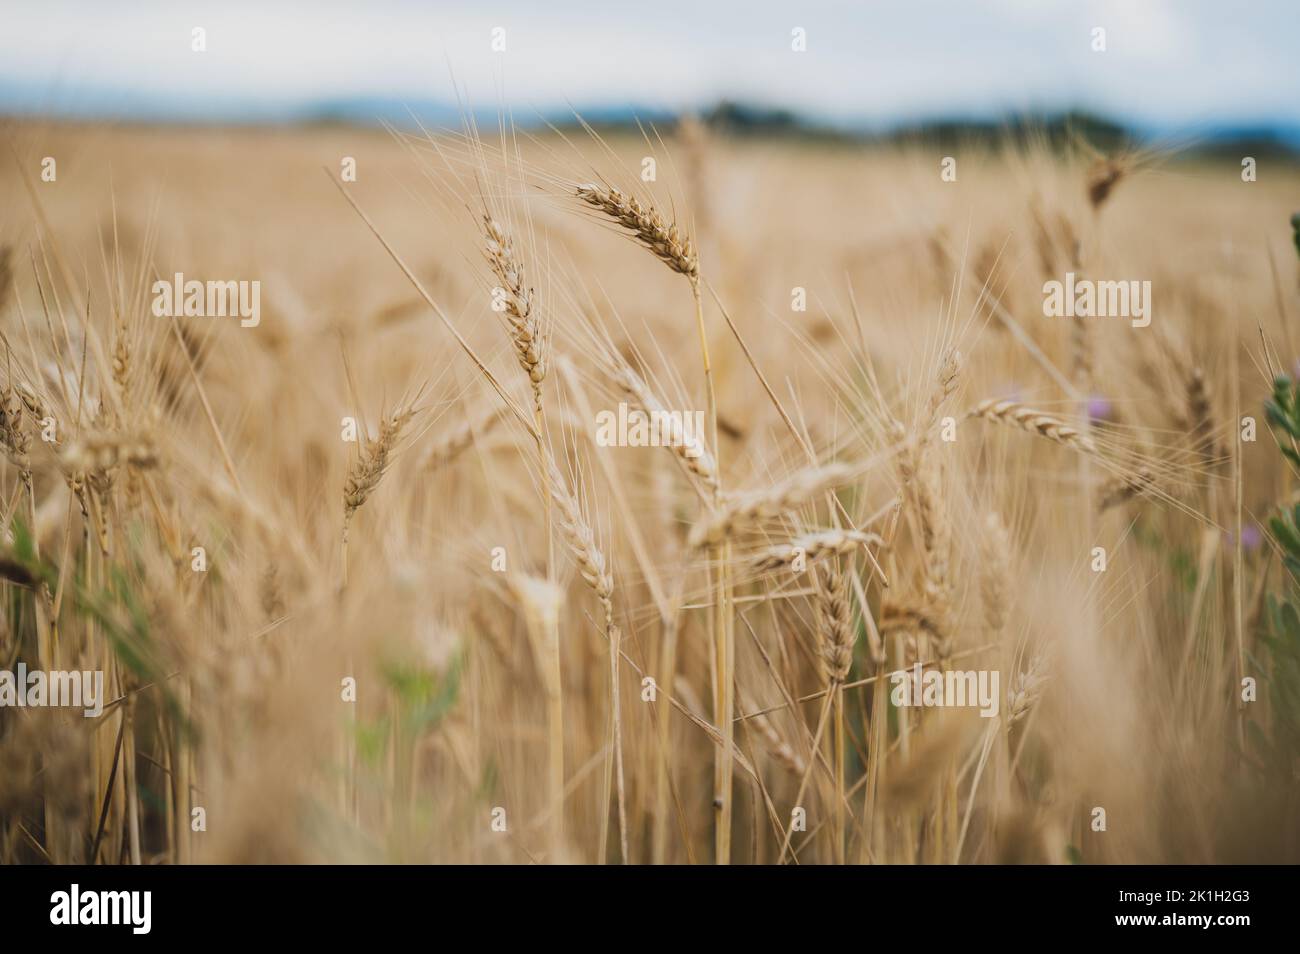 Beautiful golden wheat field growing in the summer with focus to one ear of wheat. Stock Photo